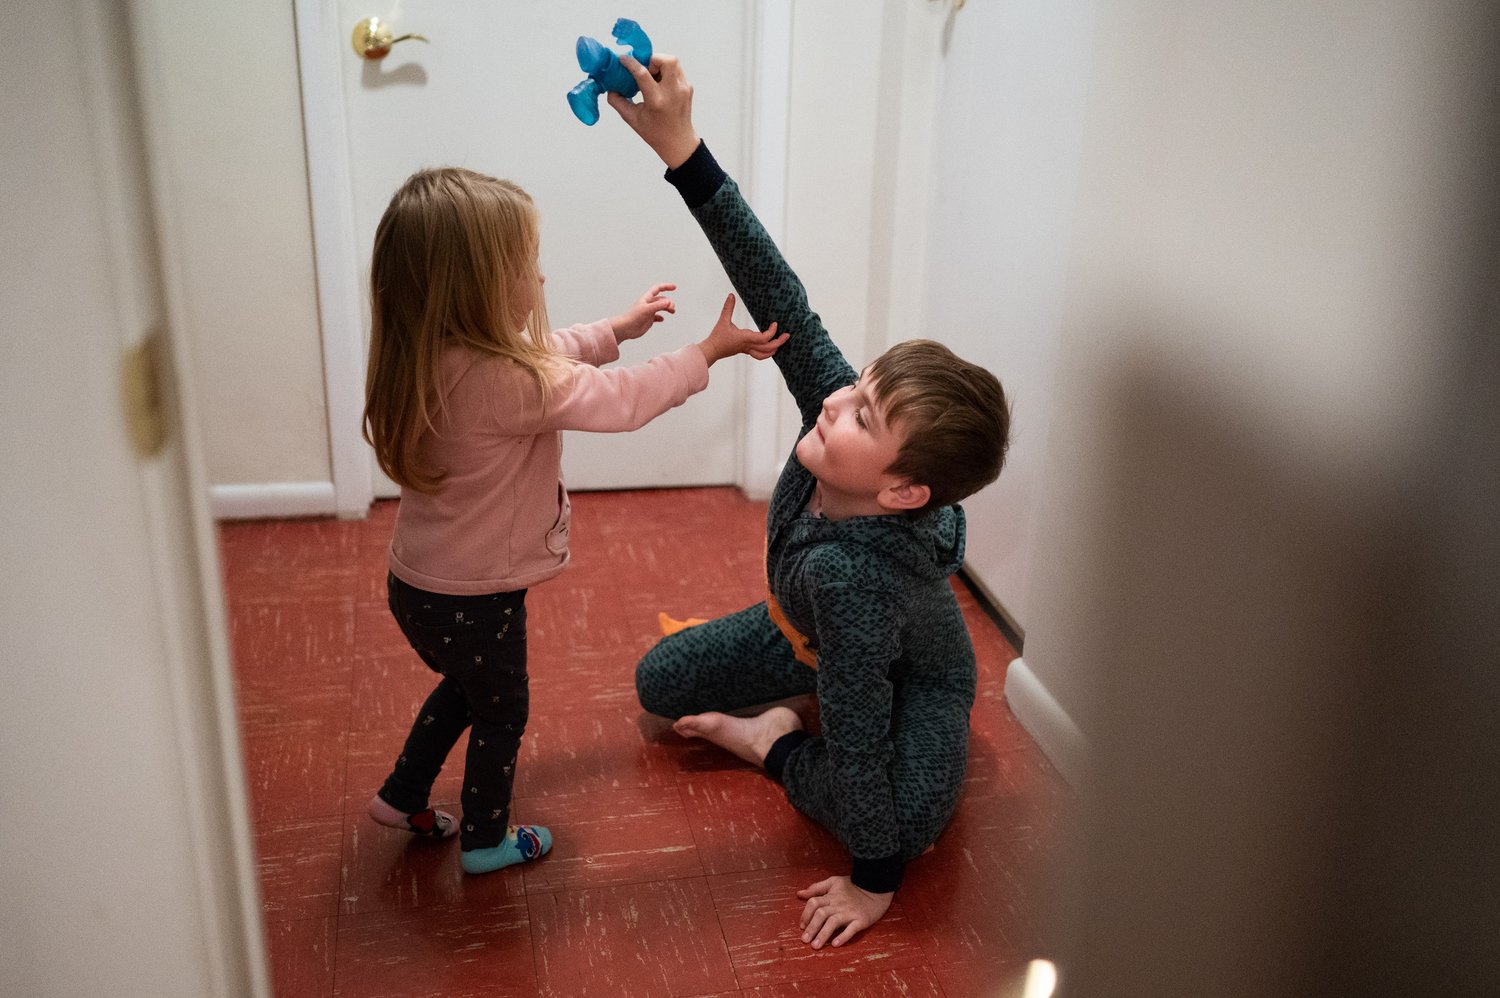   Sarra Bihun (left) and Ihor Pasichniak (right) play together in the downstairs hallway of their house.   